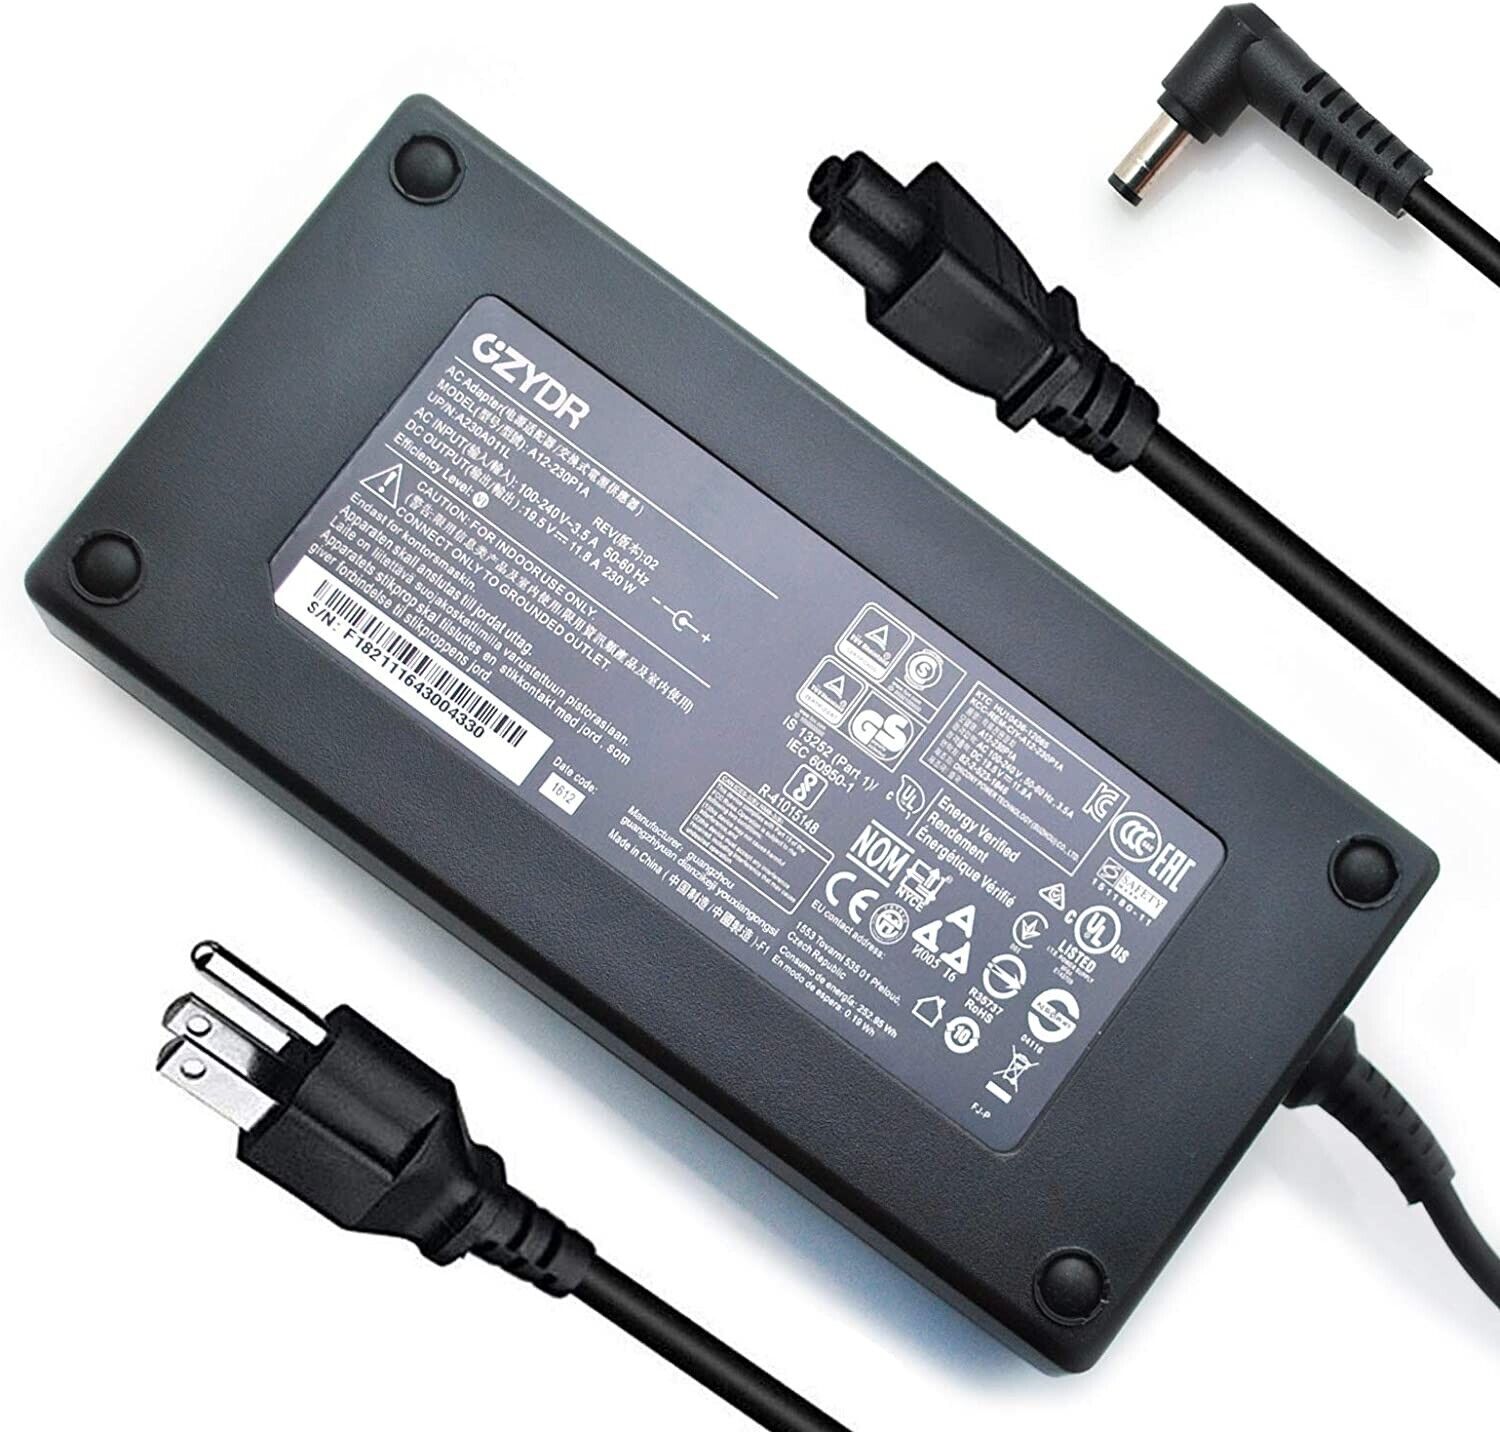 230W 19.5V 11.8A Charger A12-230P1A AC Adapter FITS Chicony A17-230P1A Msi GS73